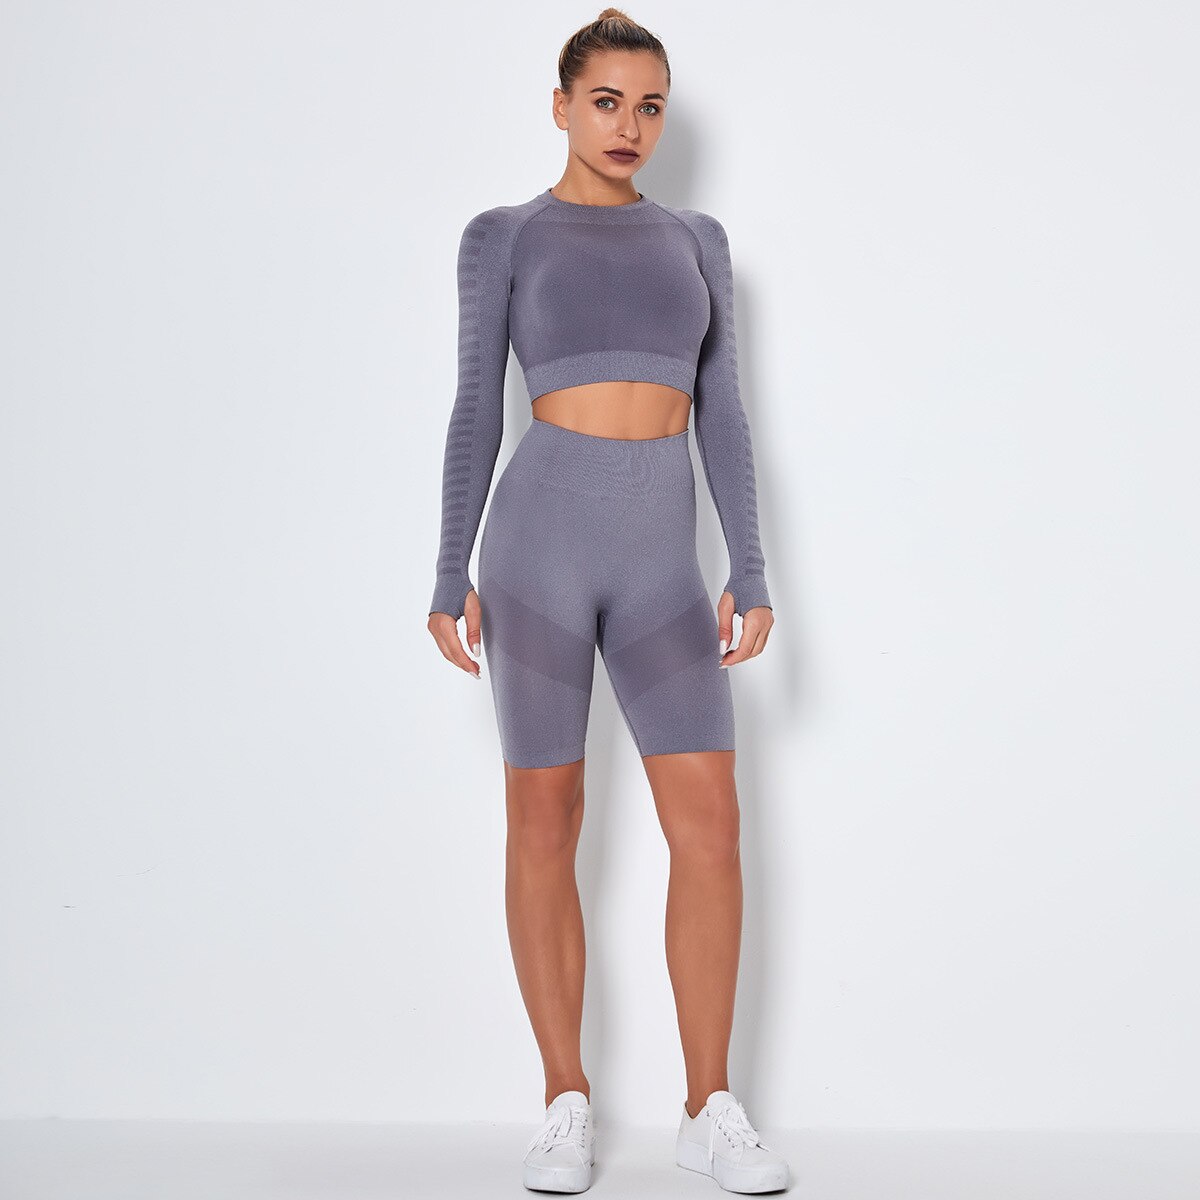 Workout Sportswear Clothing Fitness Sports Suits